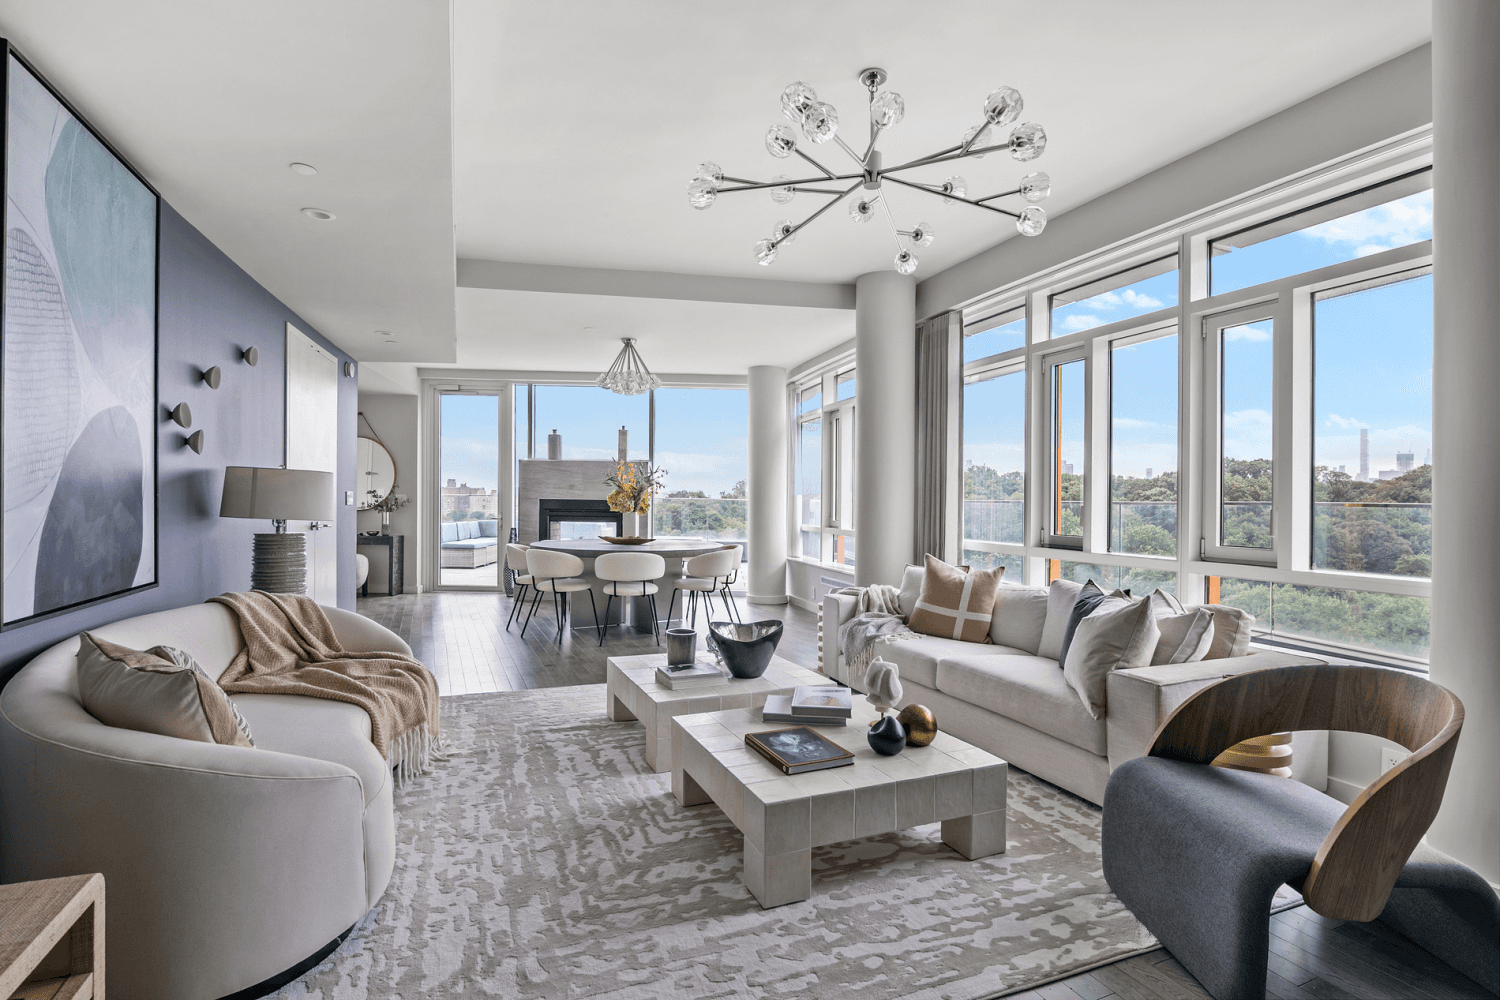 BANK APPROVED SHORT SALE AT LISTED PRICENestled in Circa Central Park at 285 W 110th St, PH10A is a distinctive penthouse boasting five bedrooms, 4.